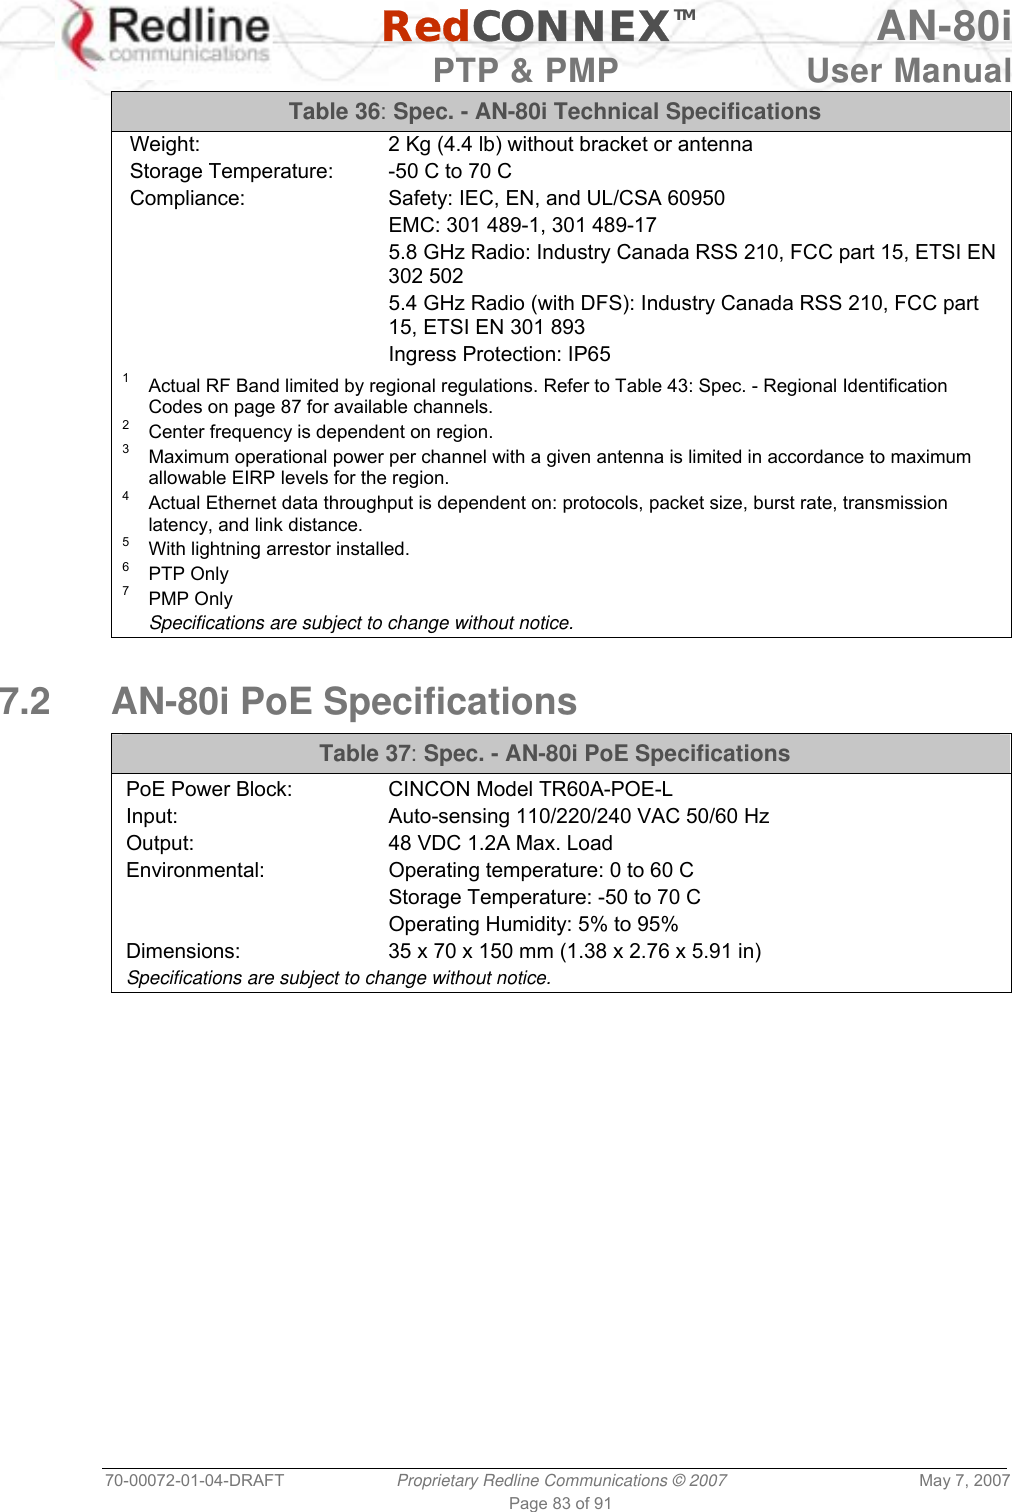   RedCONNEXTM AN-80i   PTP &amp; PMP  User Manual 70-00072-01-04-DRAFT  Proprietary Redline Communications © 2007  May 7, 2007 Page 83 of 91 Table 36: Spec. - AN-80i Technical Specifications Weight:  2 Kg (4.4 lb) without bracket or antenna Storage Temperature:  -50 C to 70 C Compliance:  Safety: IEC, EN, and UL/CSA 60950   EMC: 301 489-1, 301 489-17   5.8 GHz Radio: Industry Canada RSS 210, FCC part 15, ETSI EN 302 502   5.4 GHz Radio (with DFS): Industry Canada RSS 210, FCC part 15, ETSI EN 301 893   Ingress Protection: IP65  1   Actual RF Band limited by regional regulations. Refer to Table 43: Spec. - Regional Identification Codes on page 87 for available channels. 2   Center frequency is dependent on region. 3   Maximum operational power per channel with a given antenna is limited in accordance to maximum allowable EIRP levels for the region. 4   Actual Ethernet data throughput is dependent on: protocols, packet size, burst rate, transmission latency, and link distance. 5   With lightning arrestor installed. 6   PTP Only 7   PMP Only  Specifications are subject to change without notice.  7.2  AN-80i PoE Specifications  Table 37: Spec. - AN-80i PoE Specifications PoE Power Block:  CINCON Model TR60A-POE-L Input:  Auto-sensing 110/220/240 VAC 50/60 Hz Output:  48 VDC 1.2A Max. Load Environmental:  Operating temperature: 0 to 60 C   Storage Temperature: -50 to 70 C   Operating Humidity: 5% to 95%  Dimensions:  35 x 70 x 150 mm (1.38 x 2.76 x 5.91 in) Specifications are subject to change without notice.  